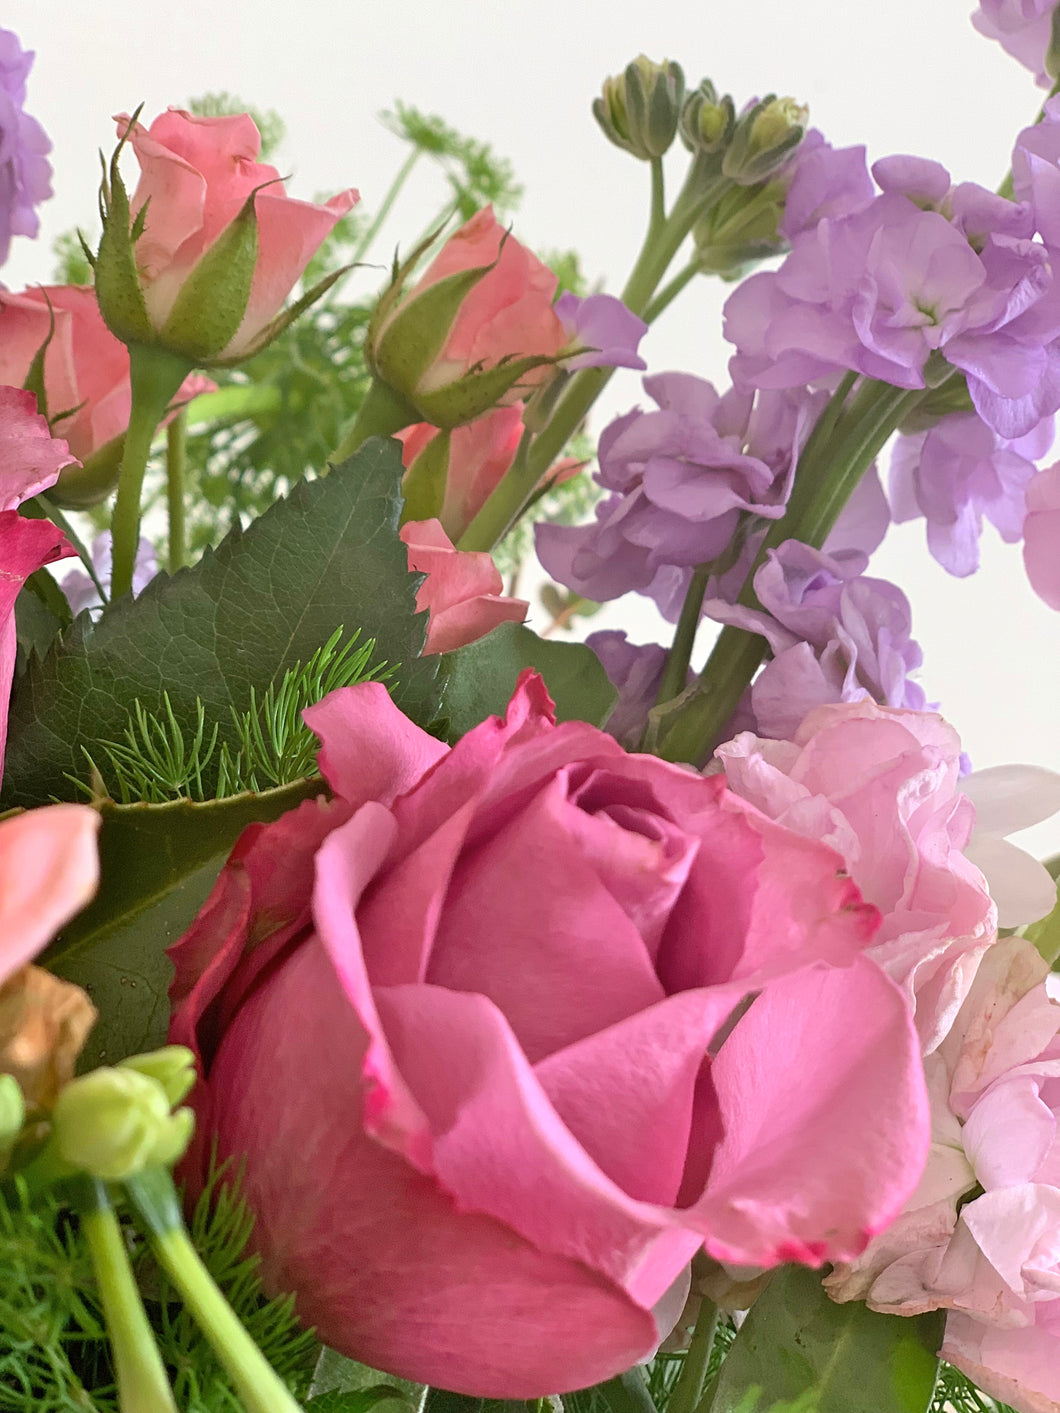 Soft-headed blooms add vibrant yet delicate colour to this stunning bouquet. to